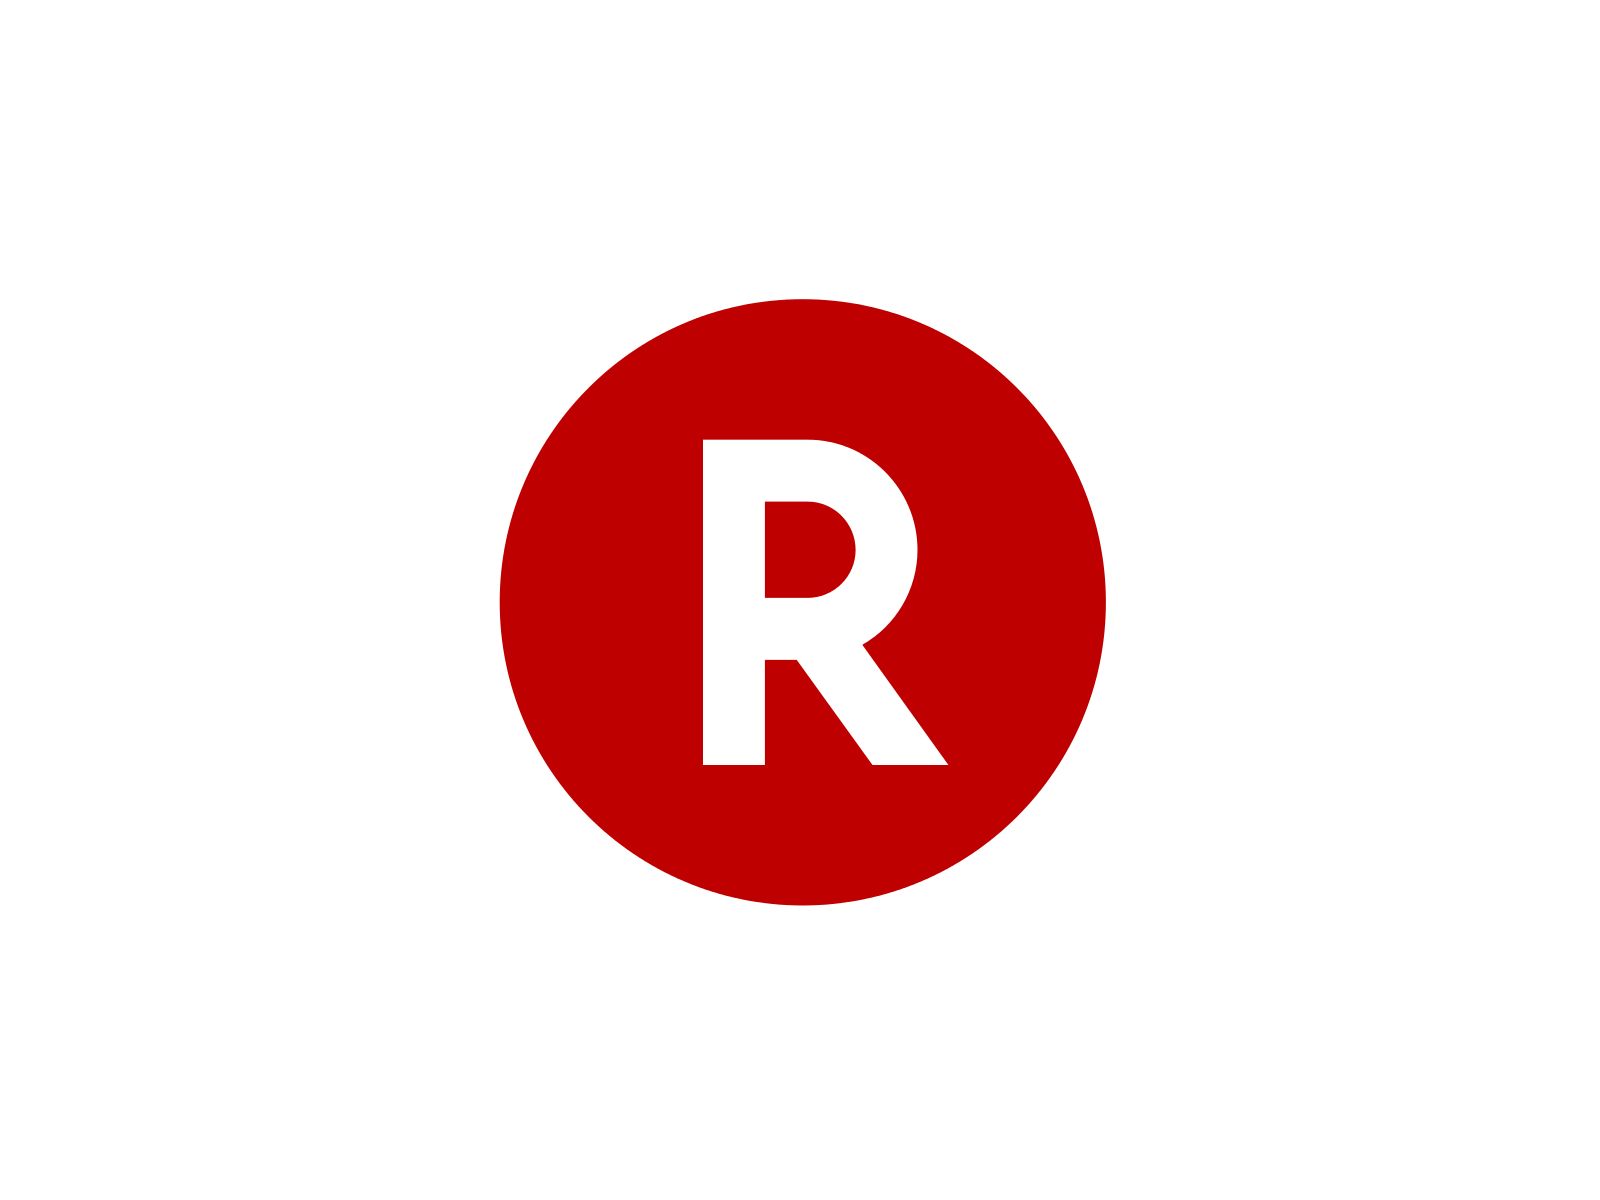 Red R Logo - Red r logo clipart images gallery for free download | MyReal